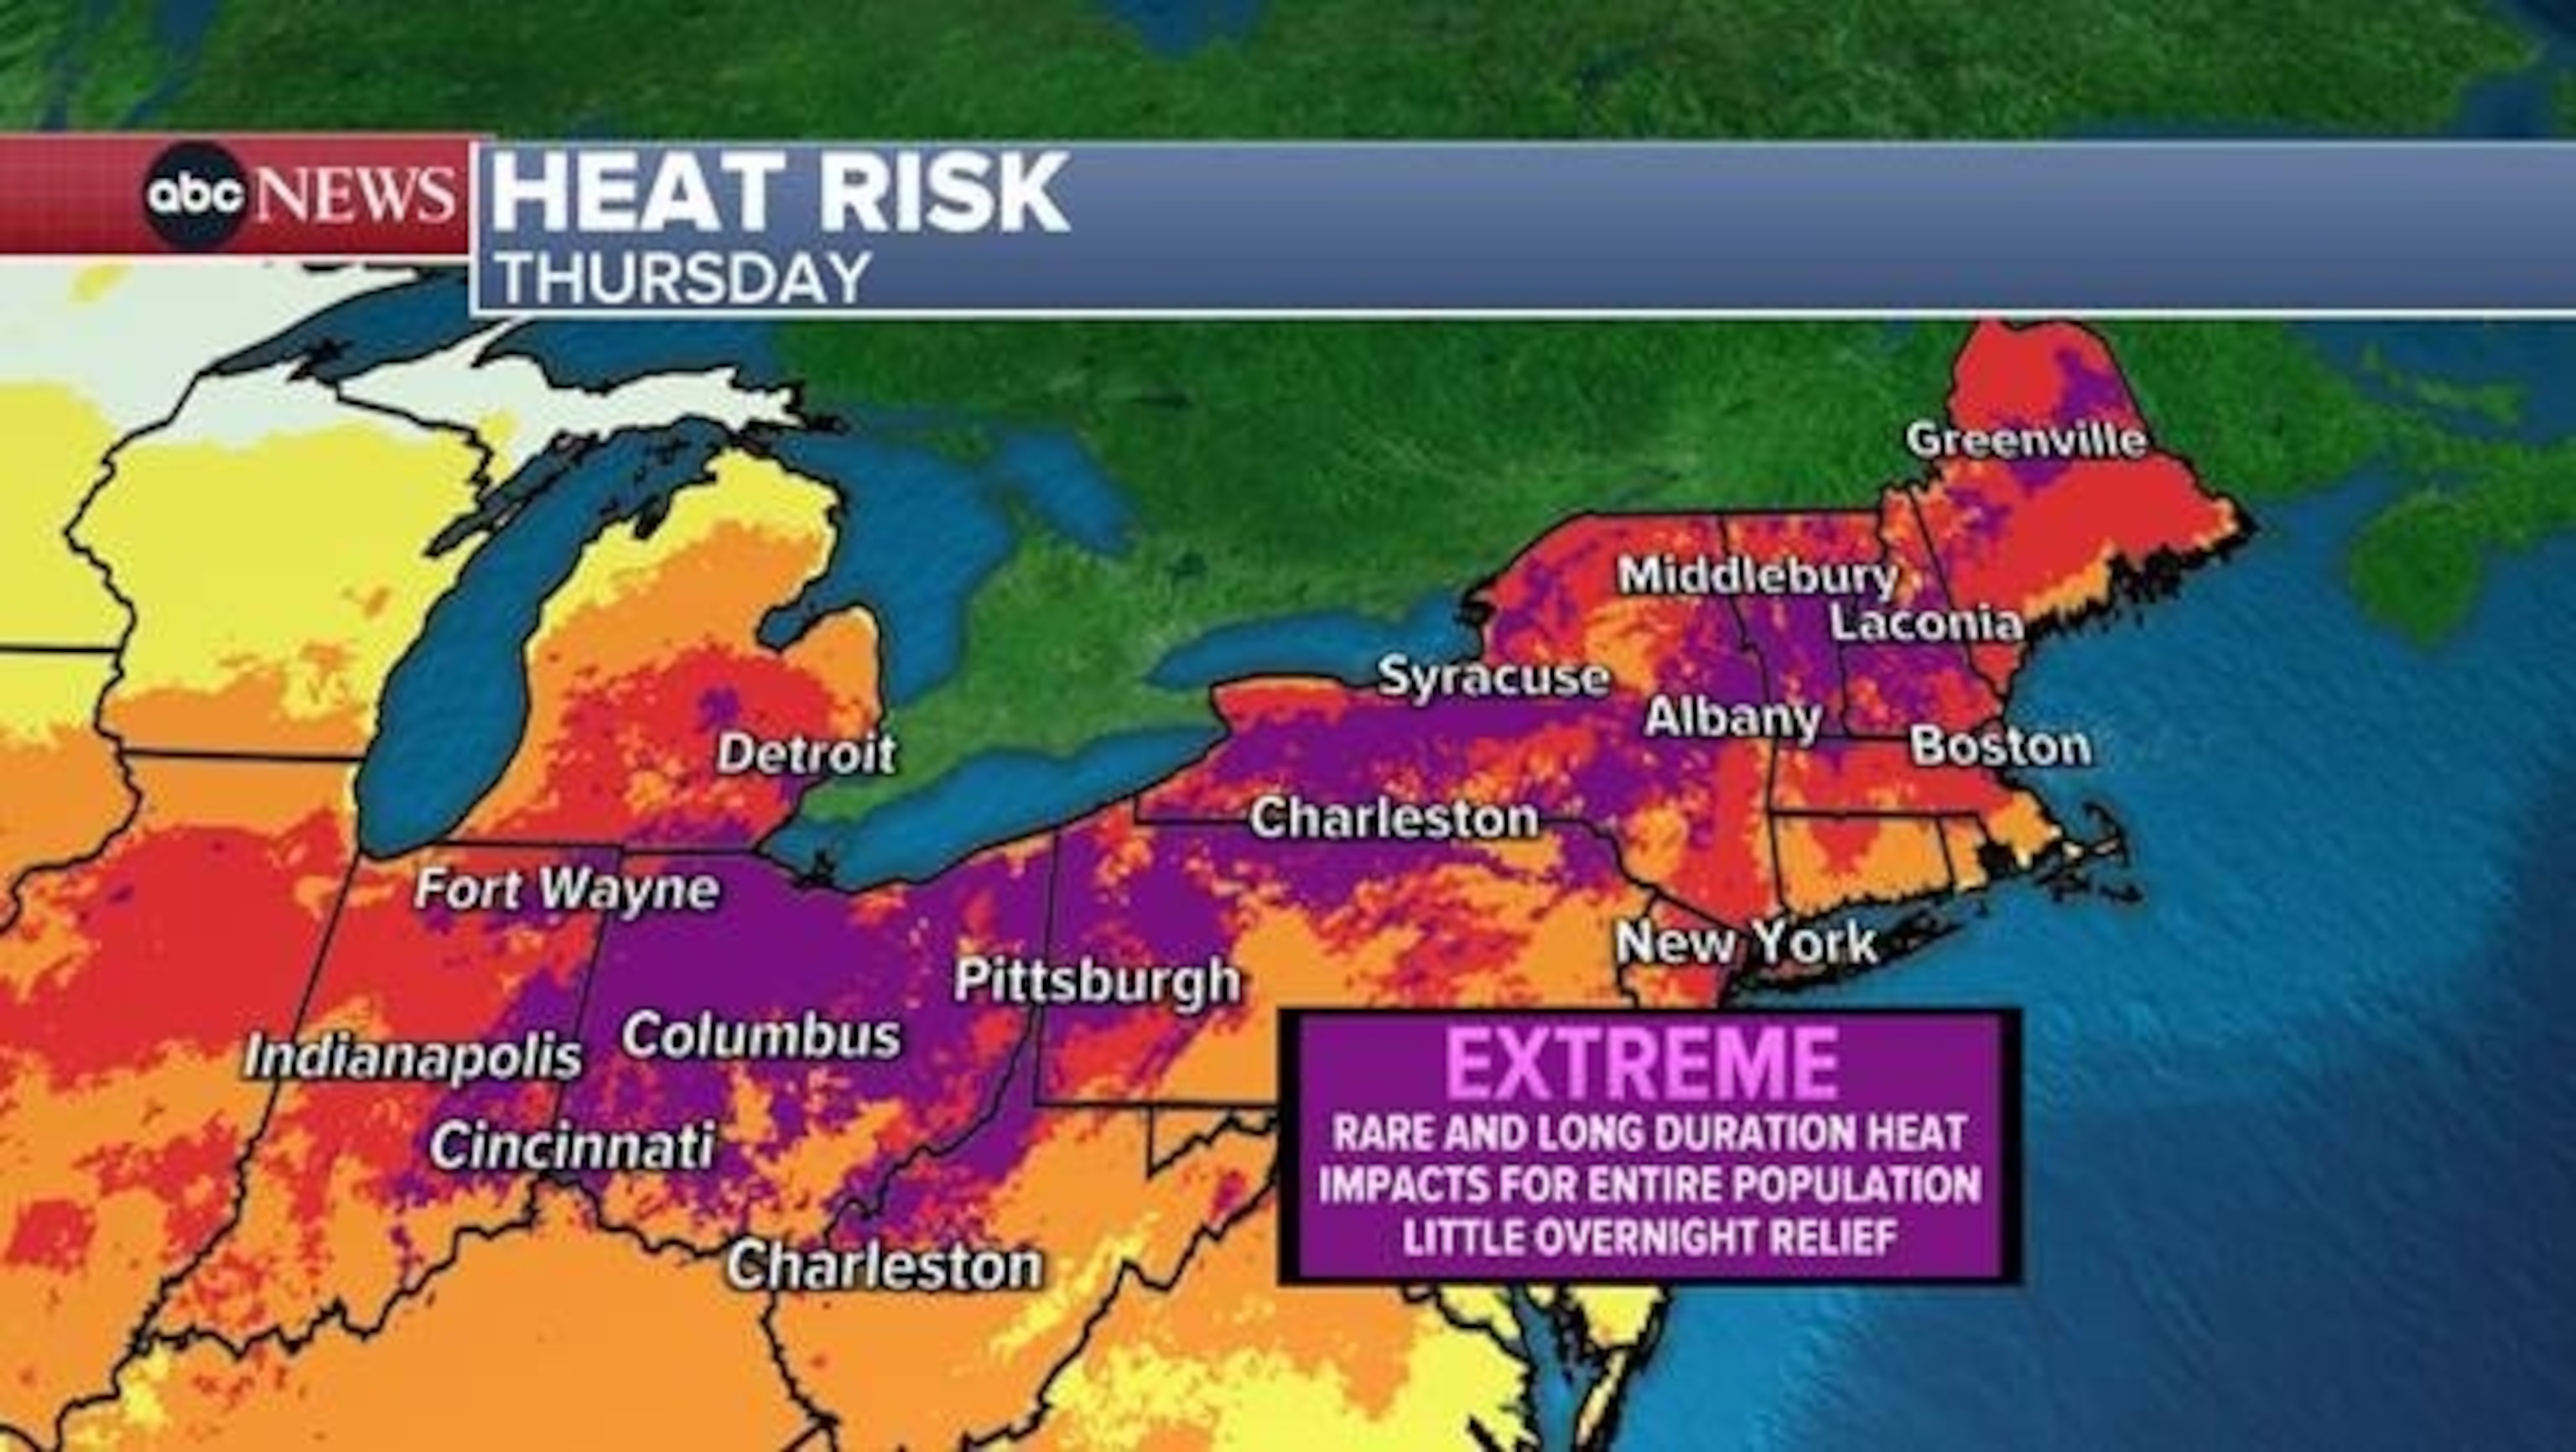 PHOTO: Heat risk weather map for Thursday, June 20.